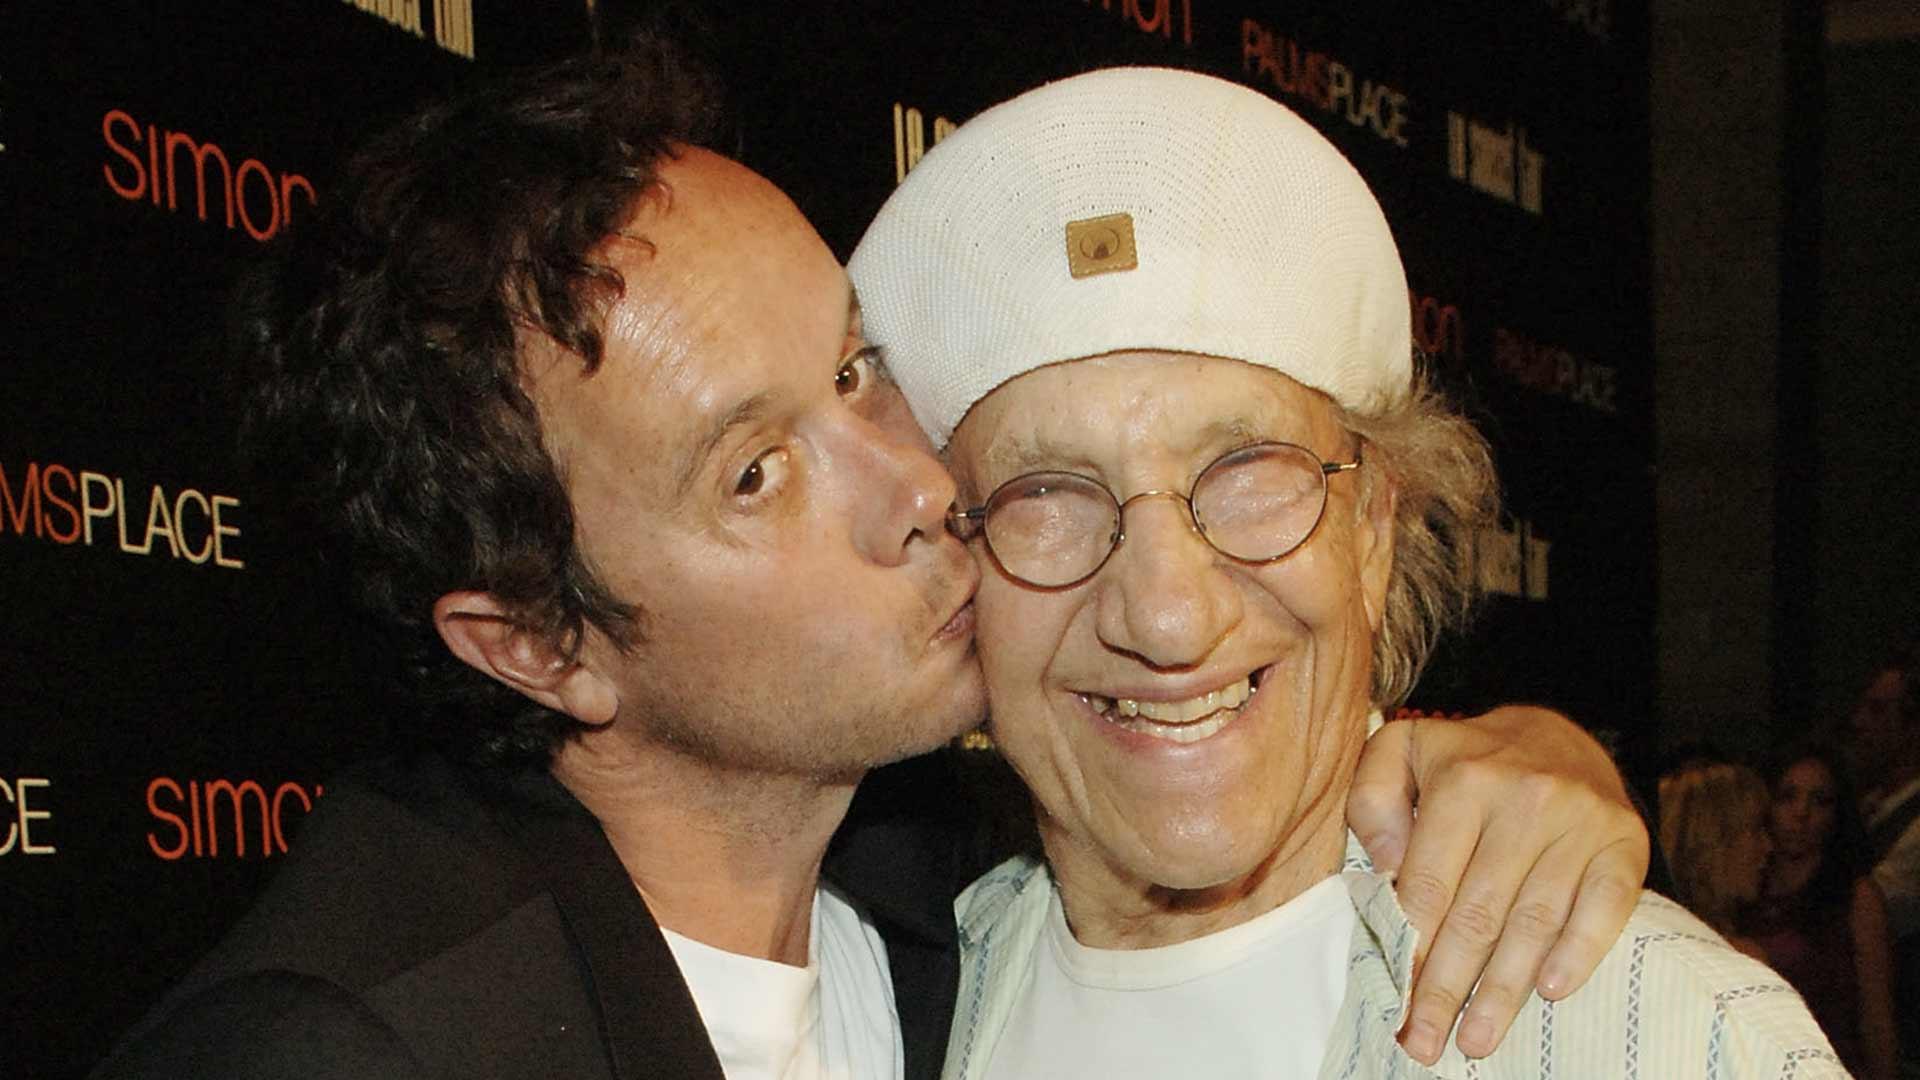 Pauly Shore Shares Beautiful Memories of His Father, Sammy Shore, After Comic Dies at 92